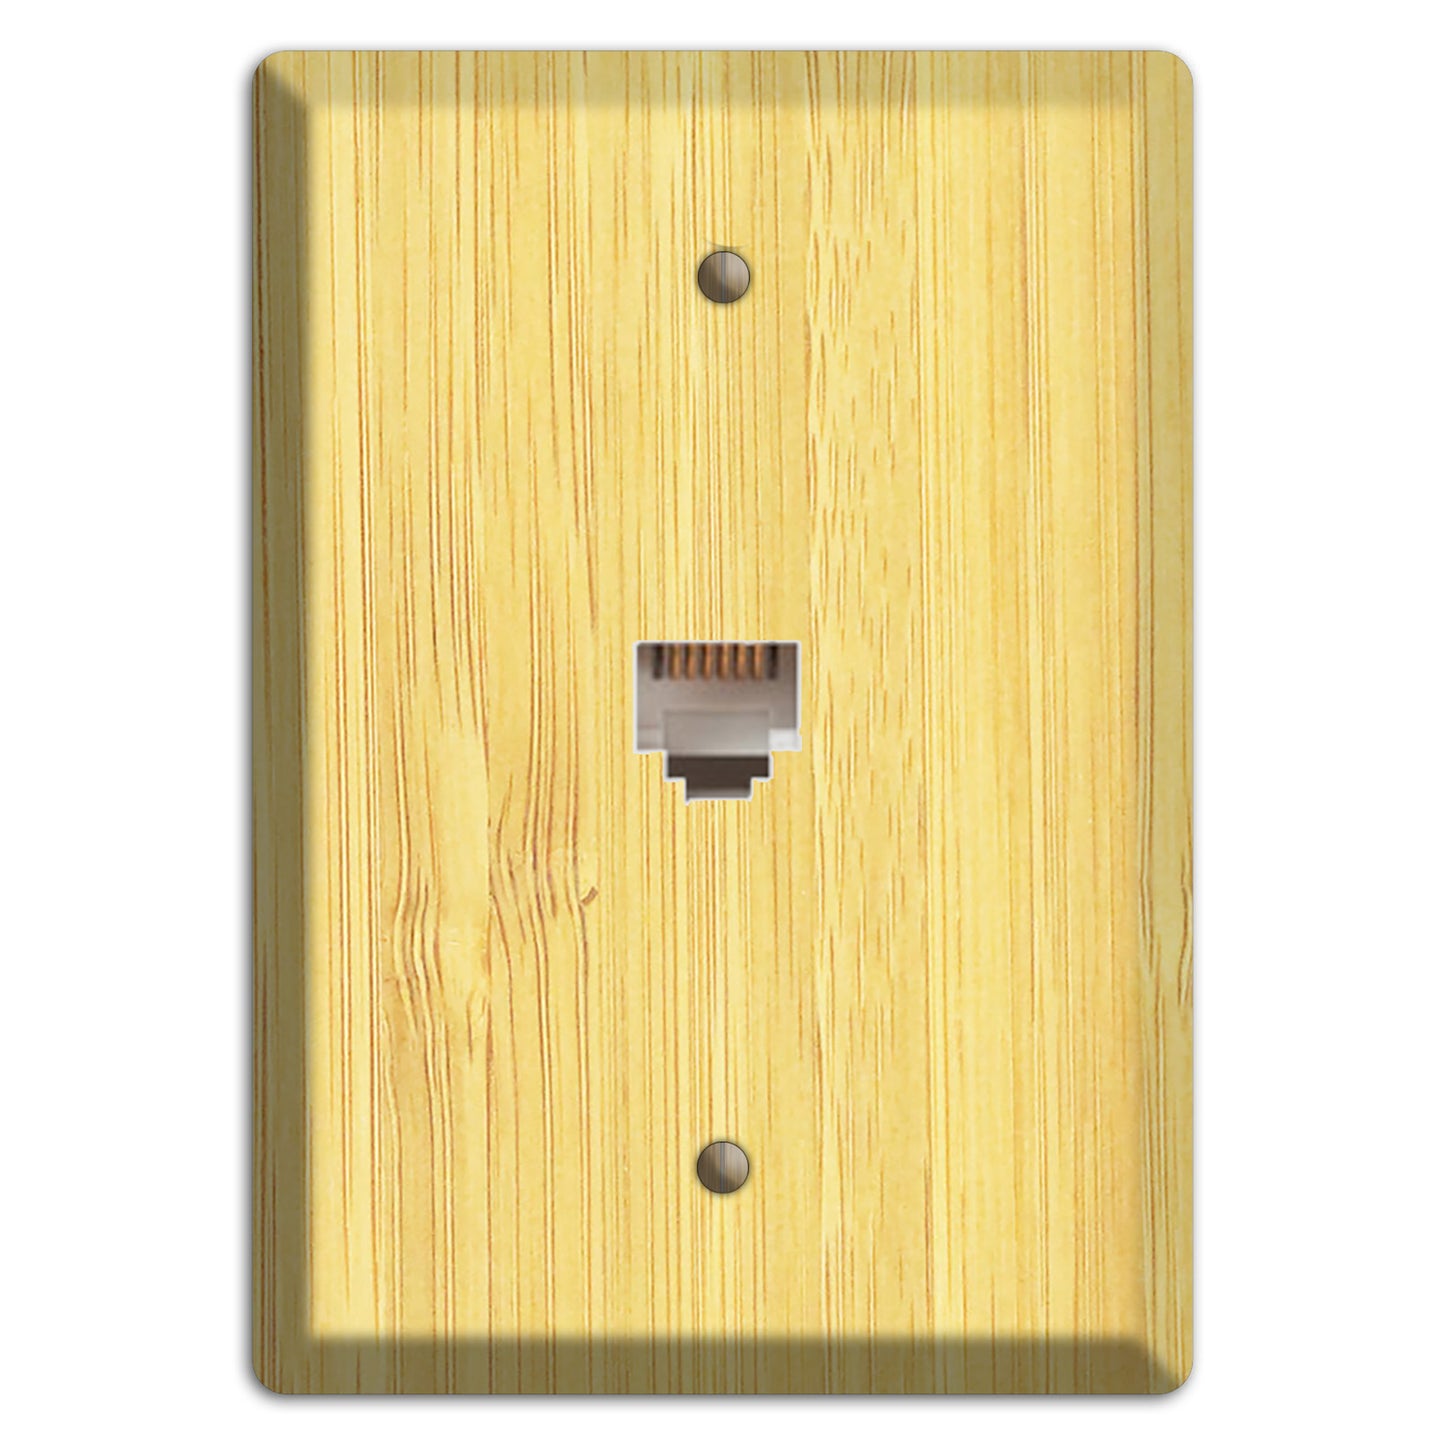 Natural Bamboo Wood Duplex Outlet / Receptacle Cover Plate